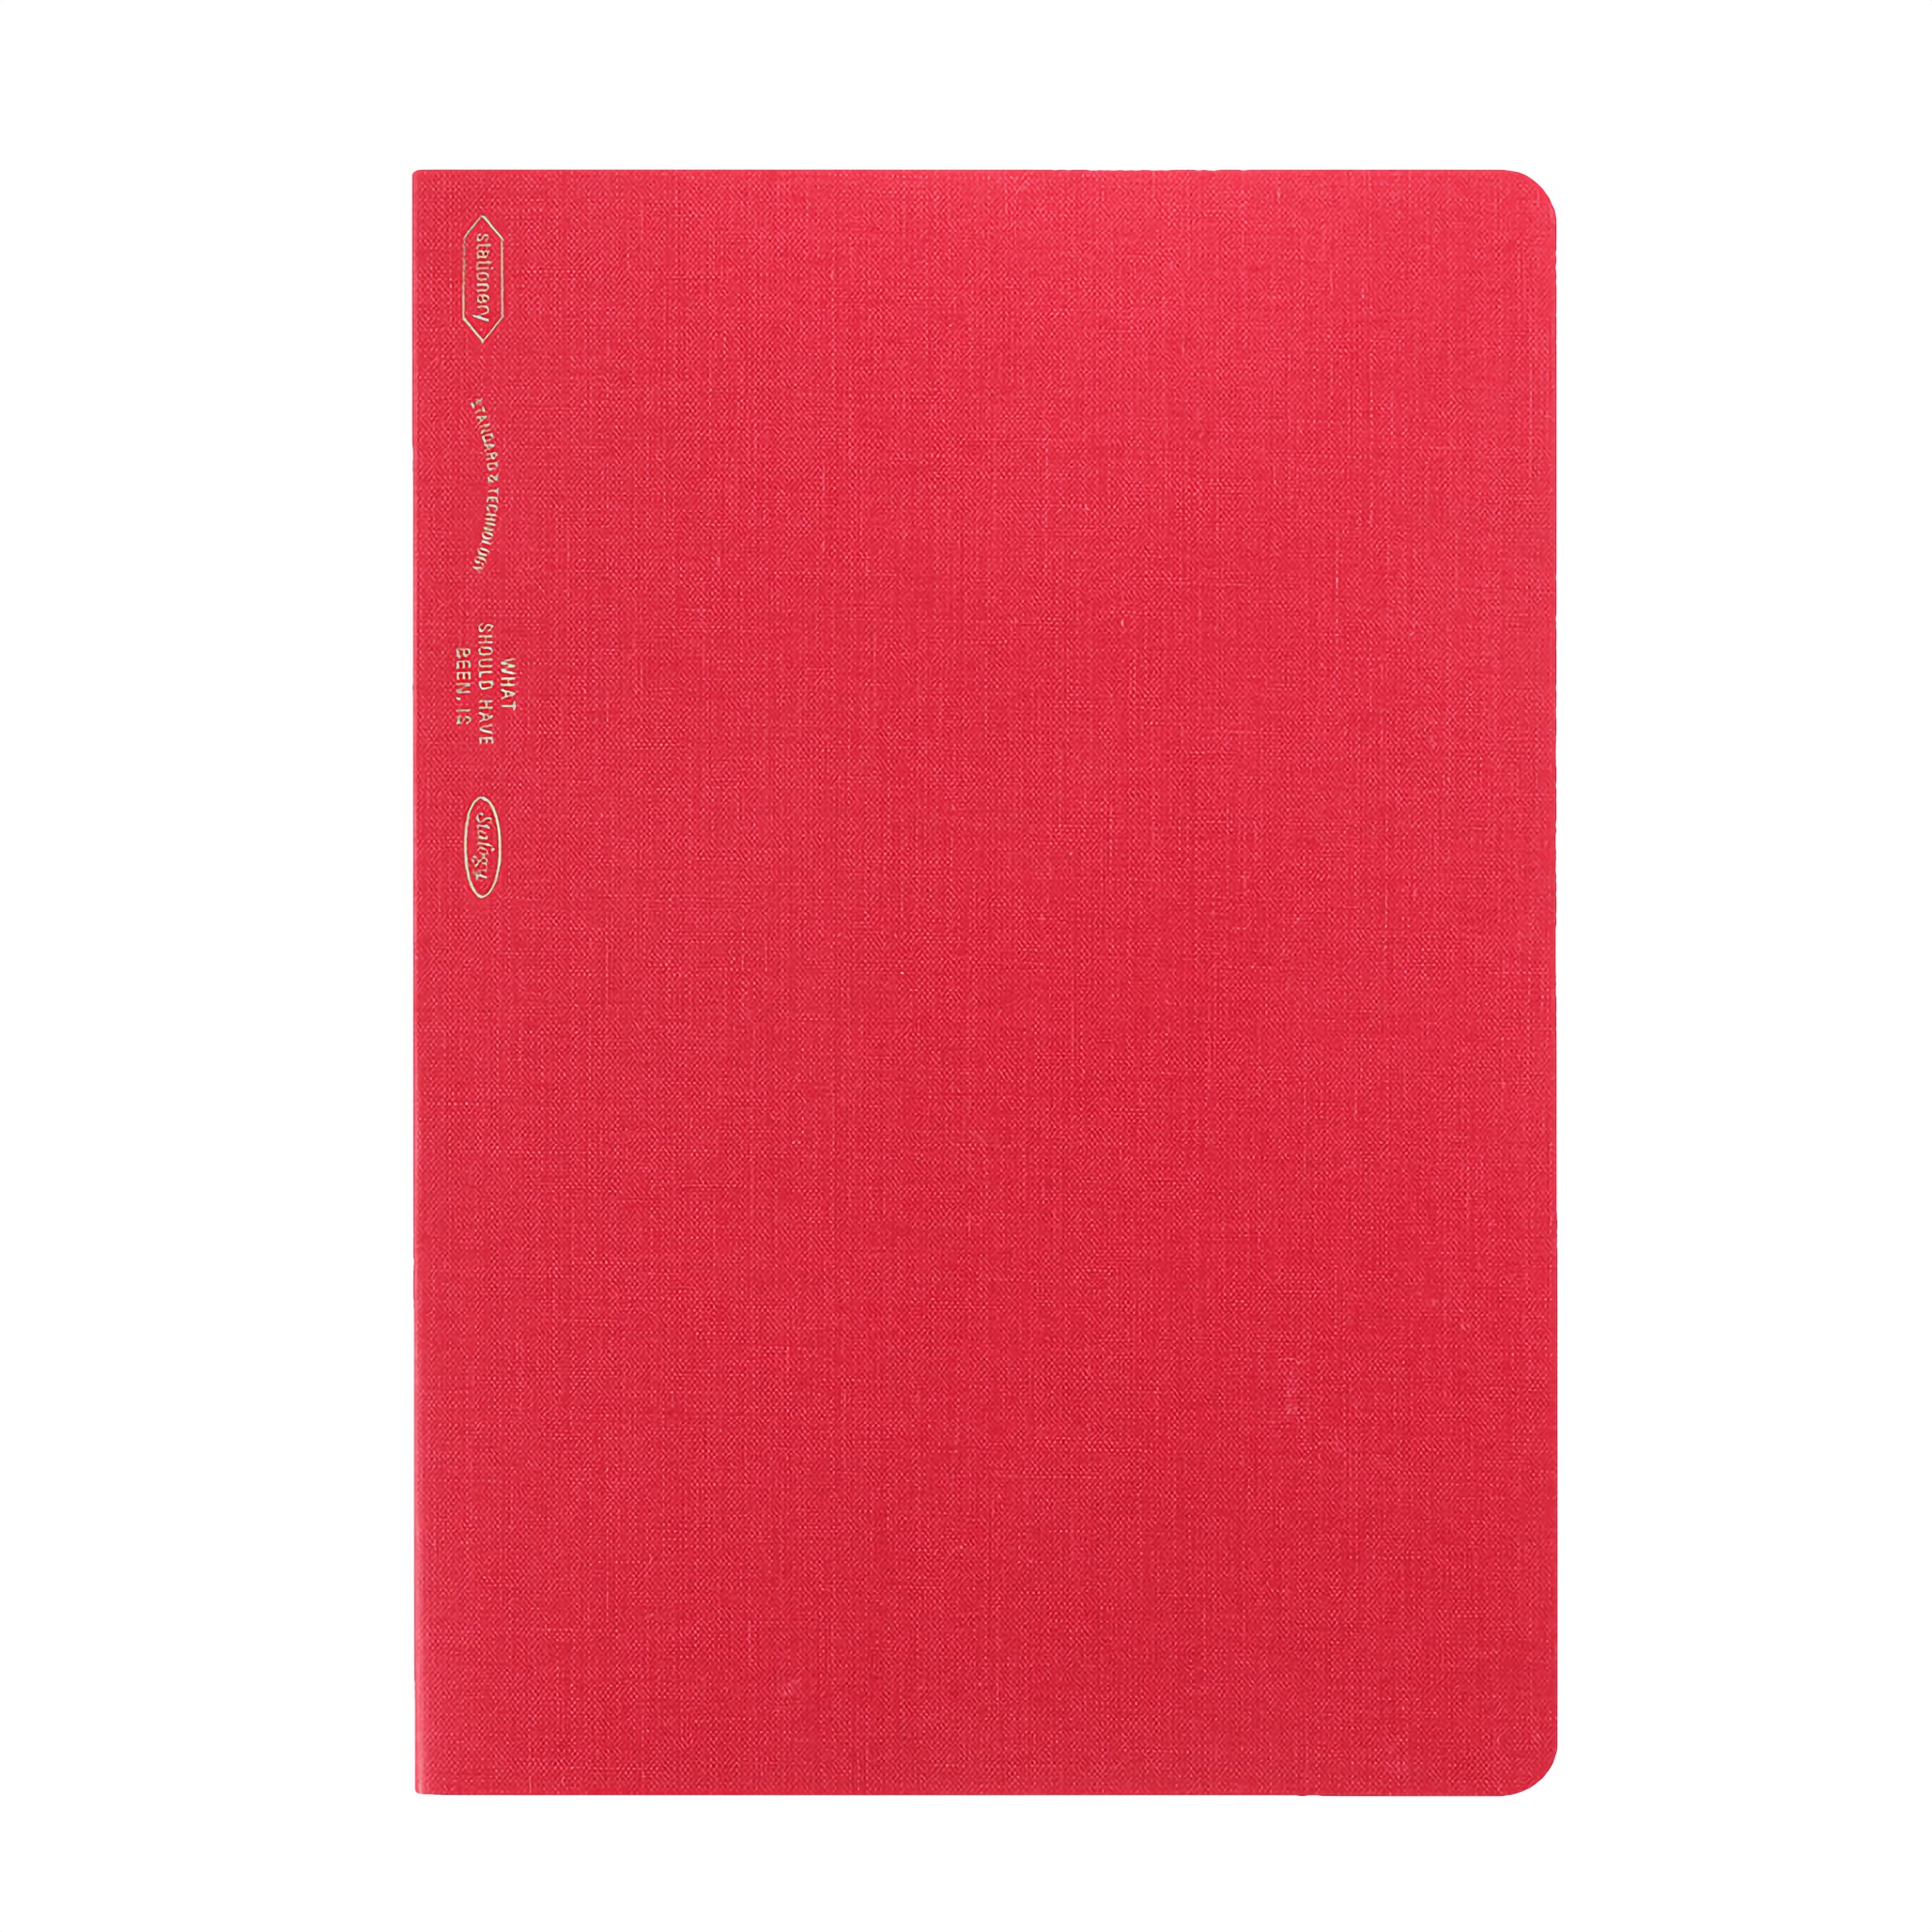 Stálogy 018 1/2 Year Notebook [A5] Berry Red [Limited Edition]